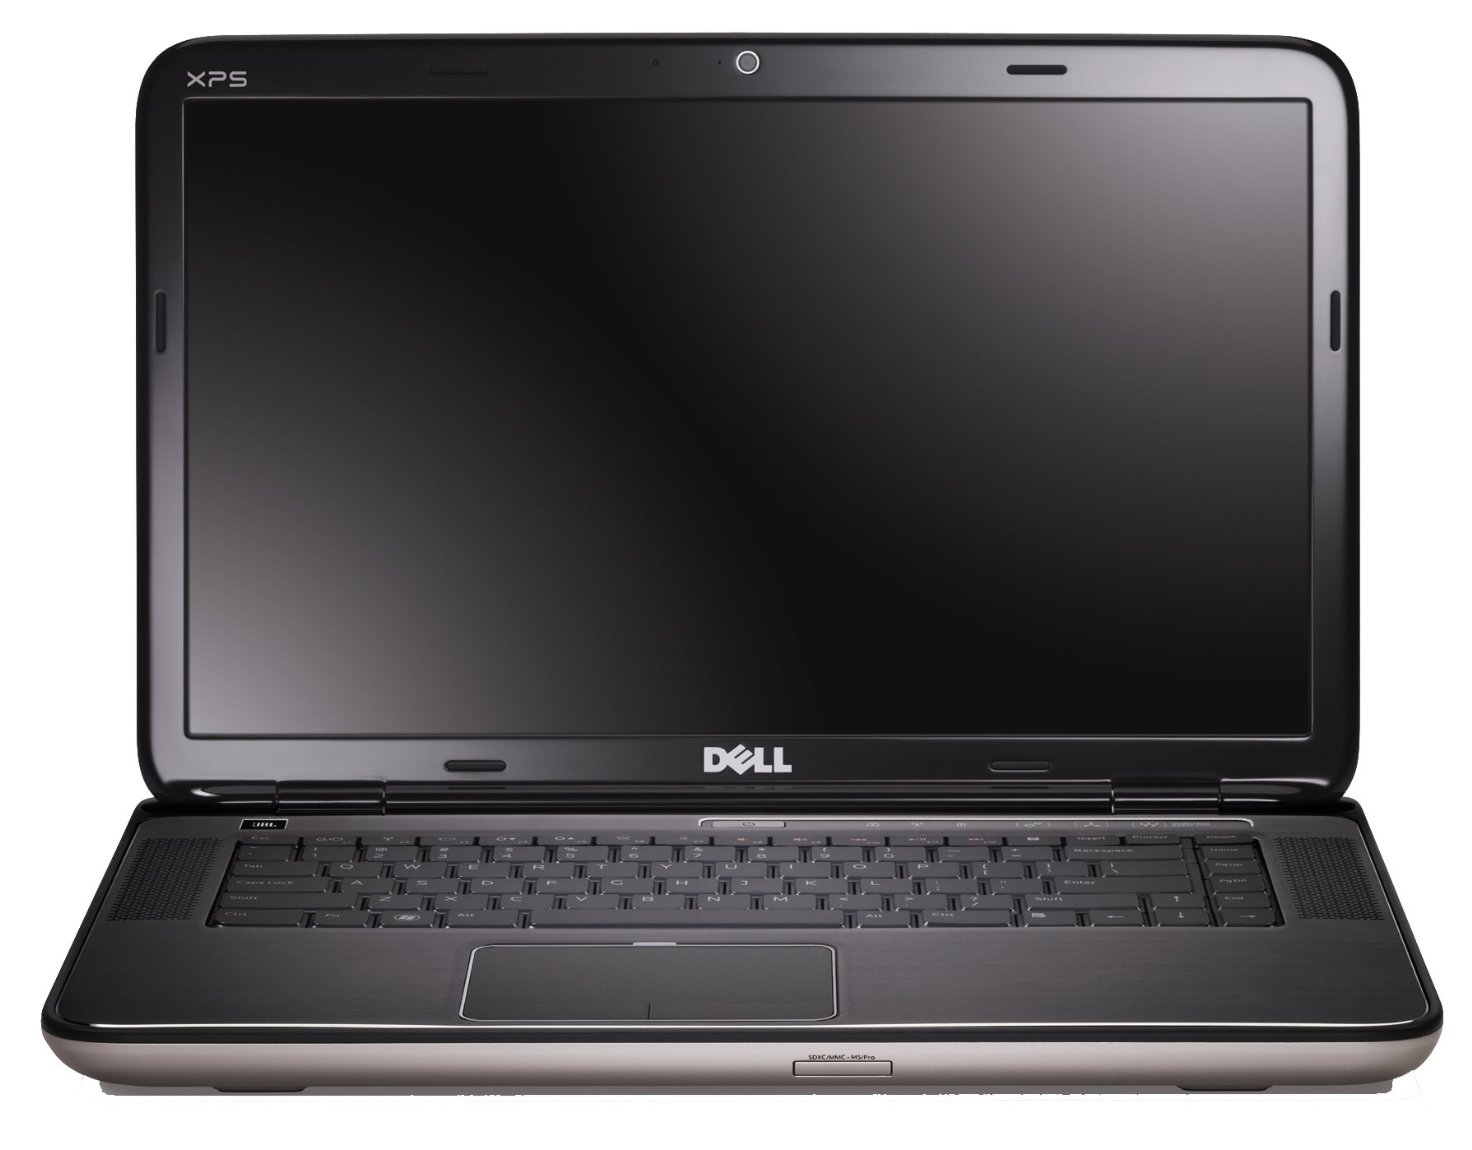   Dell XPS 15 (7590-6572)  1